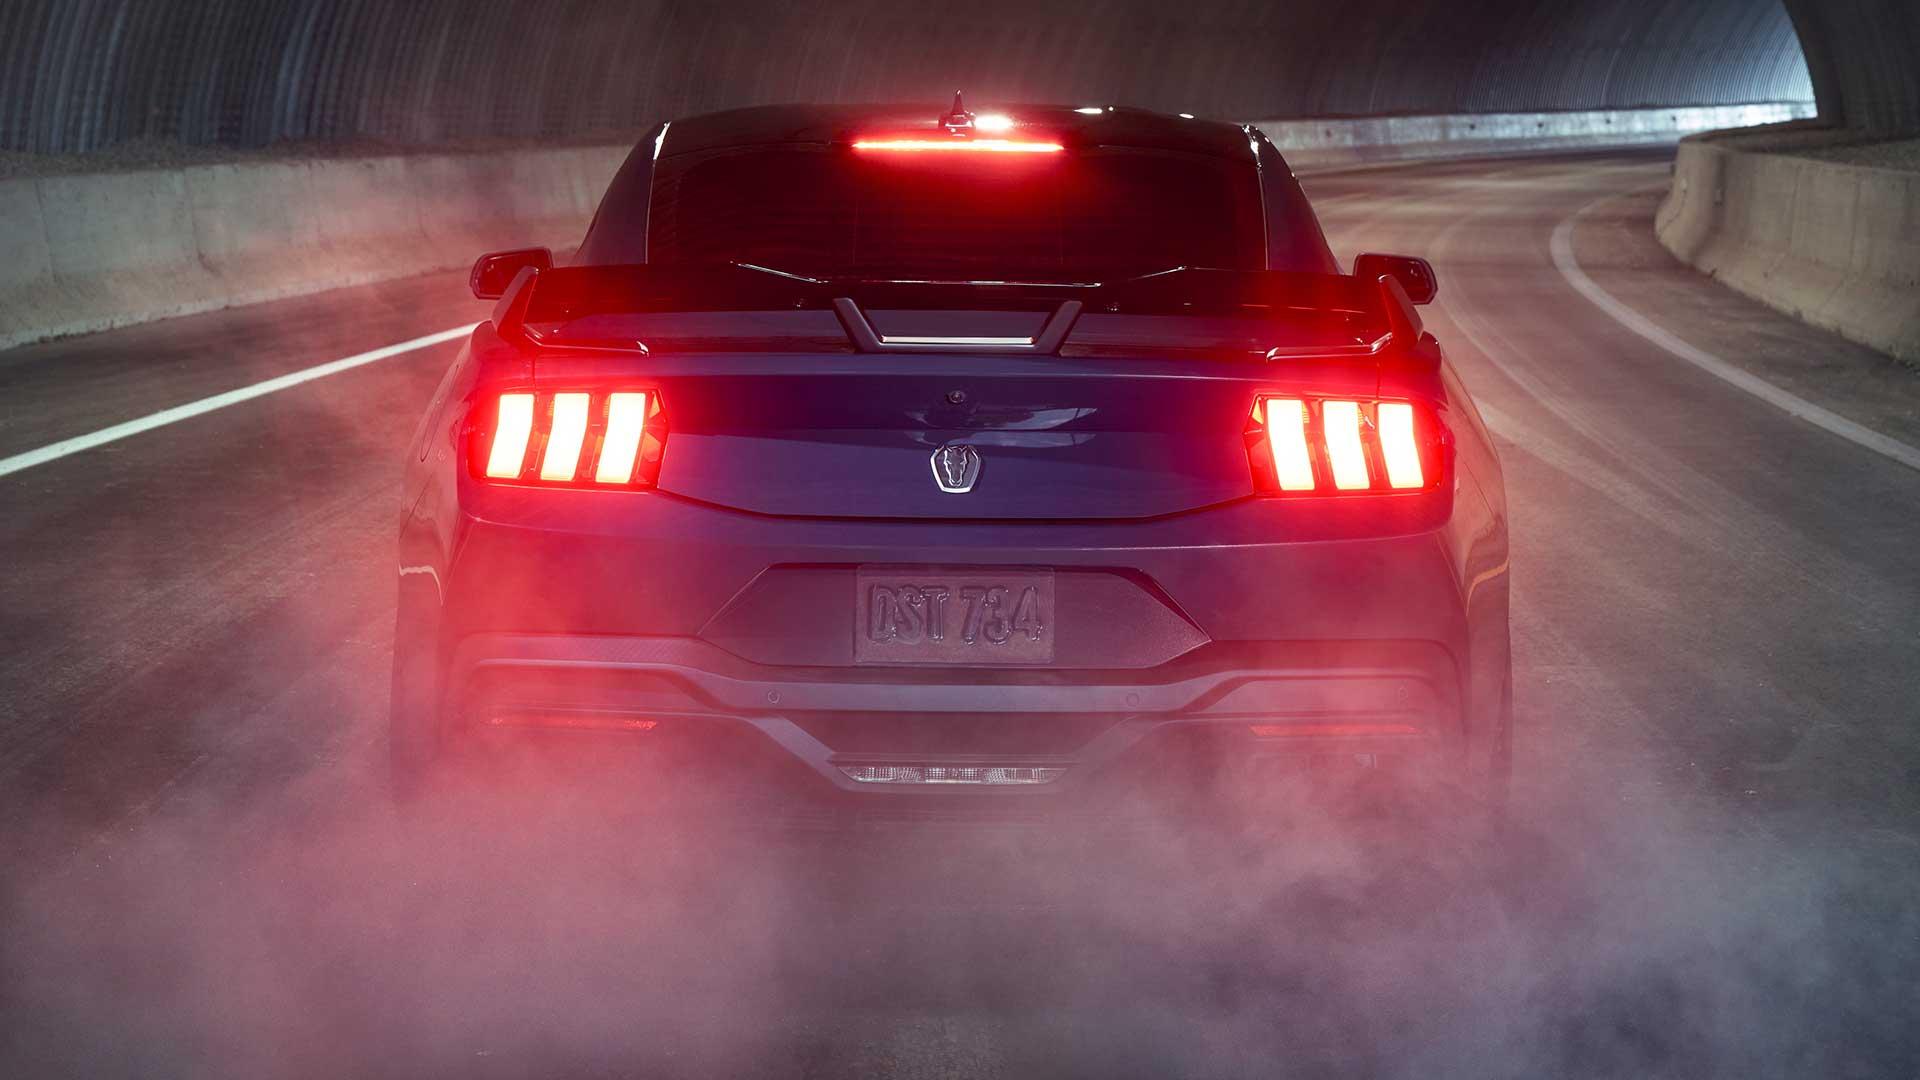 You can remote start the new Ford Mustang and rev the V8